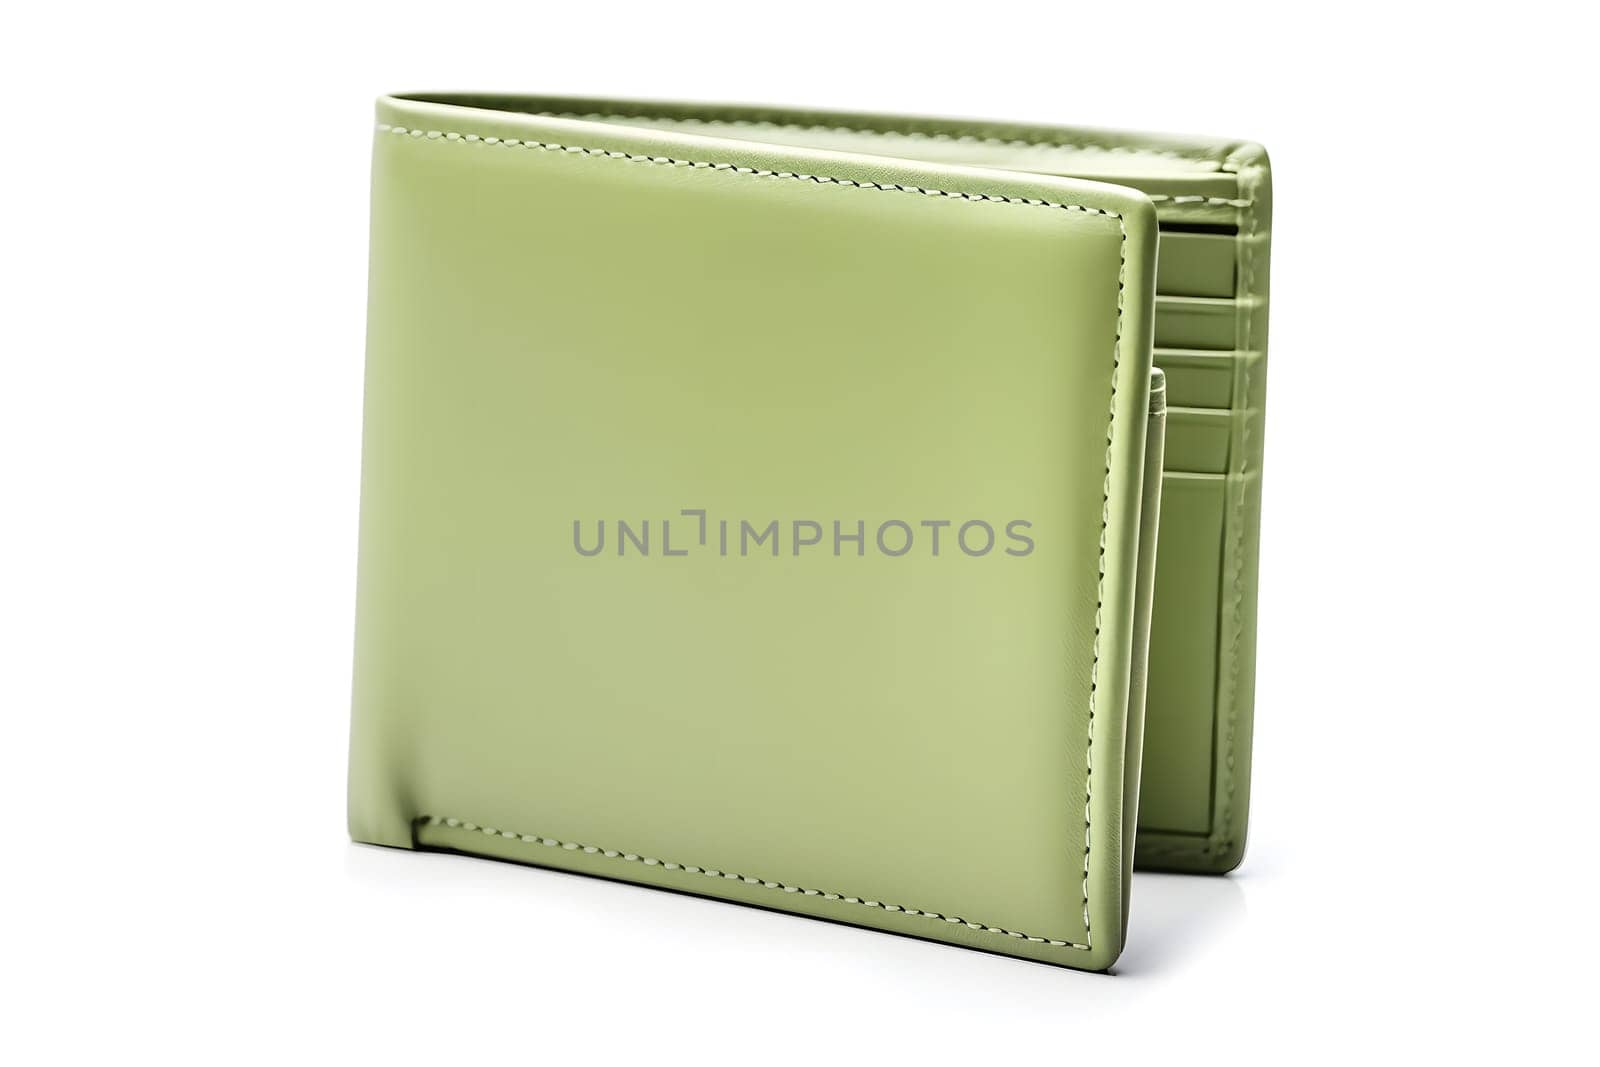 leather wallet isolated on white background, neural network generated image by z1b